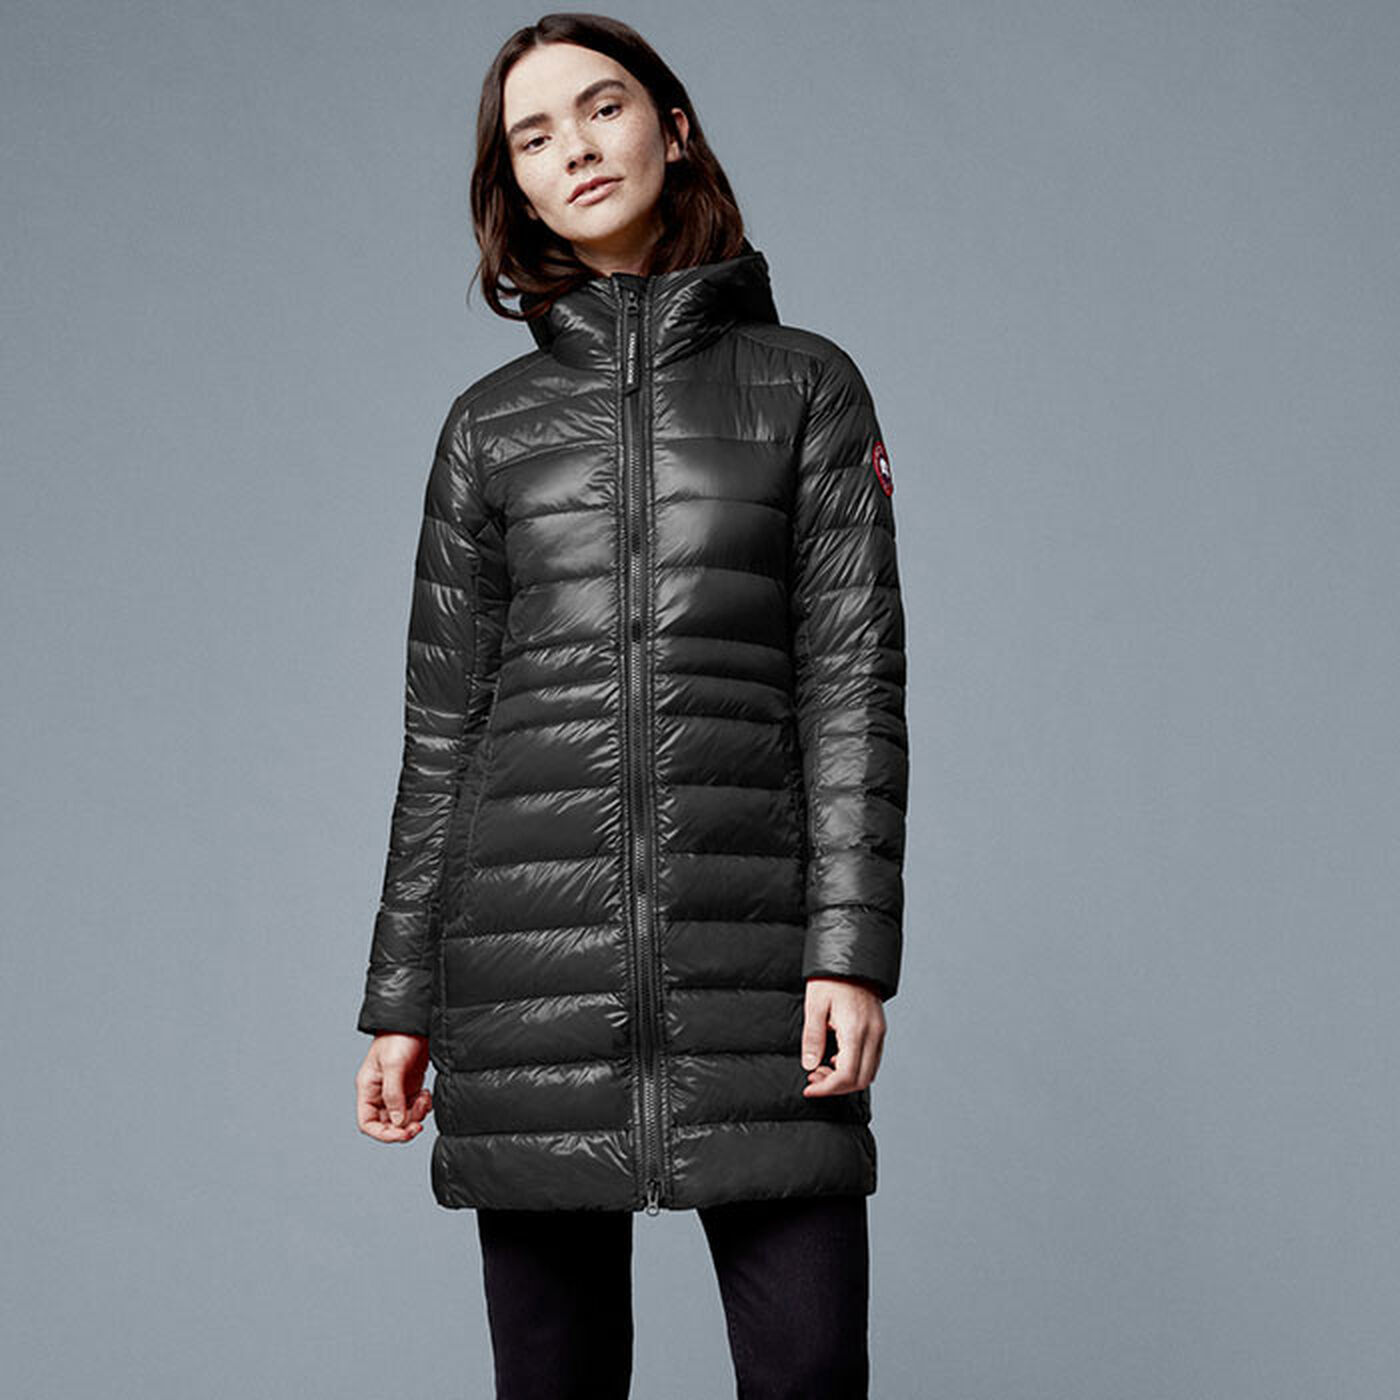 Women's Cypress Hooded Jacket | Canada Goose | Sporting Life Online